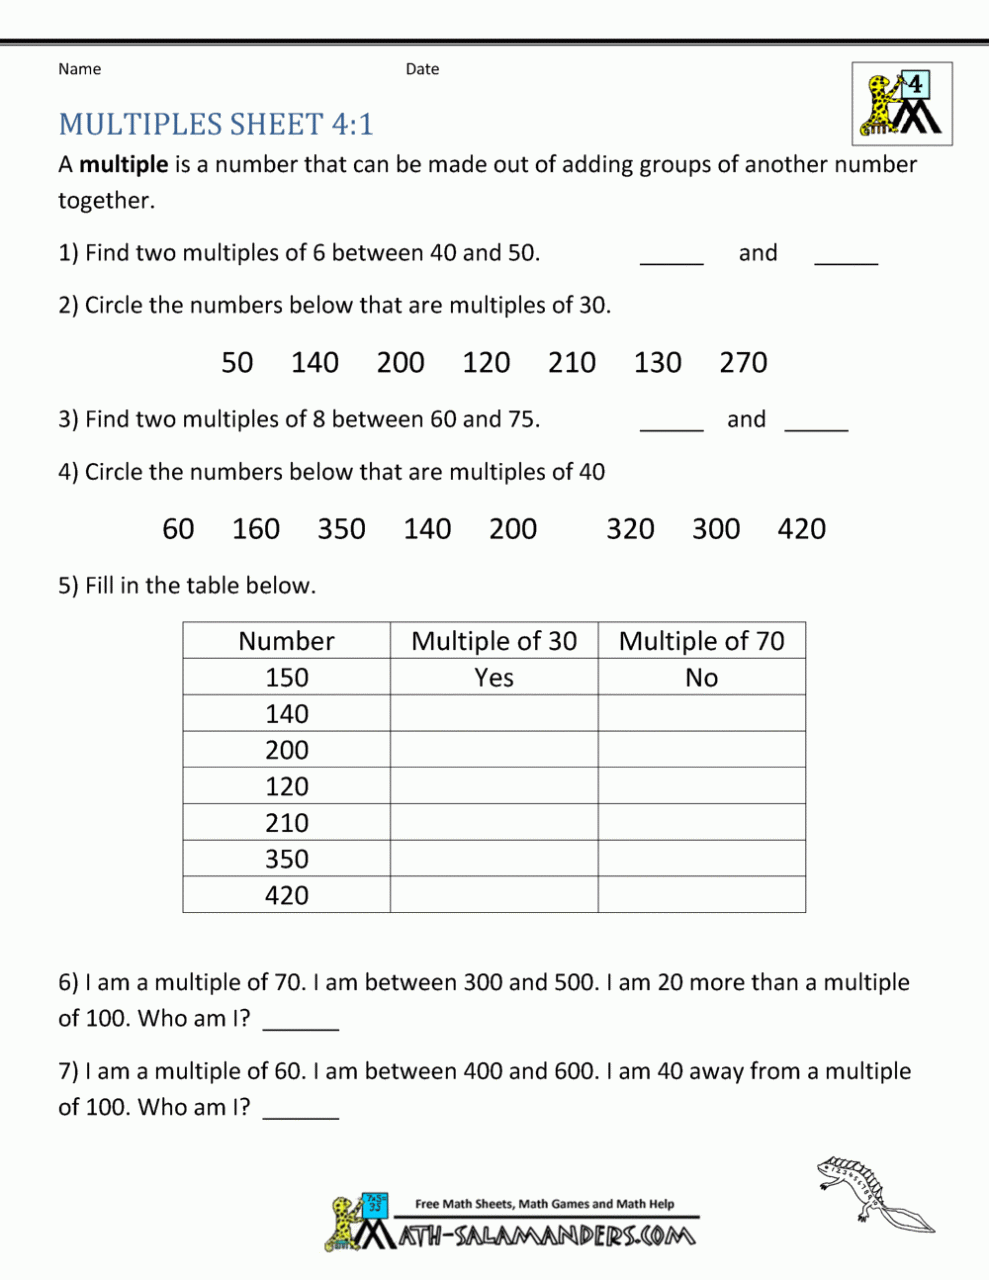 Factors And Multiples Worksheet For Grade 6 With Answers